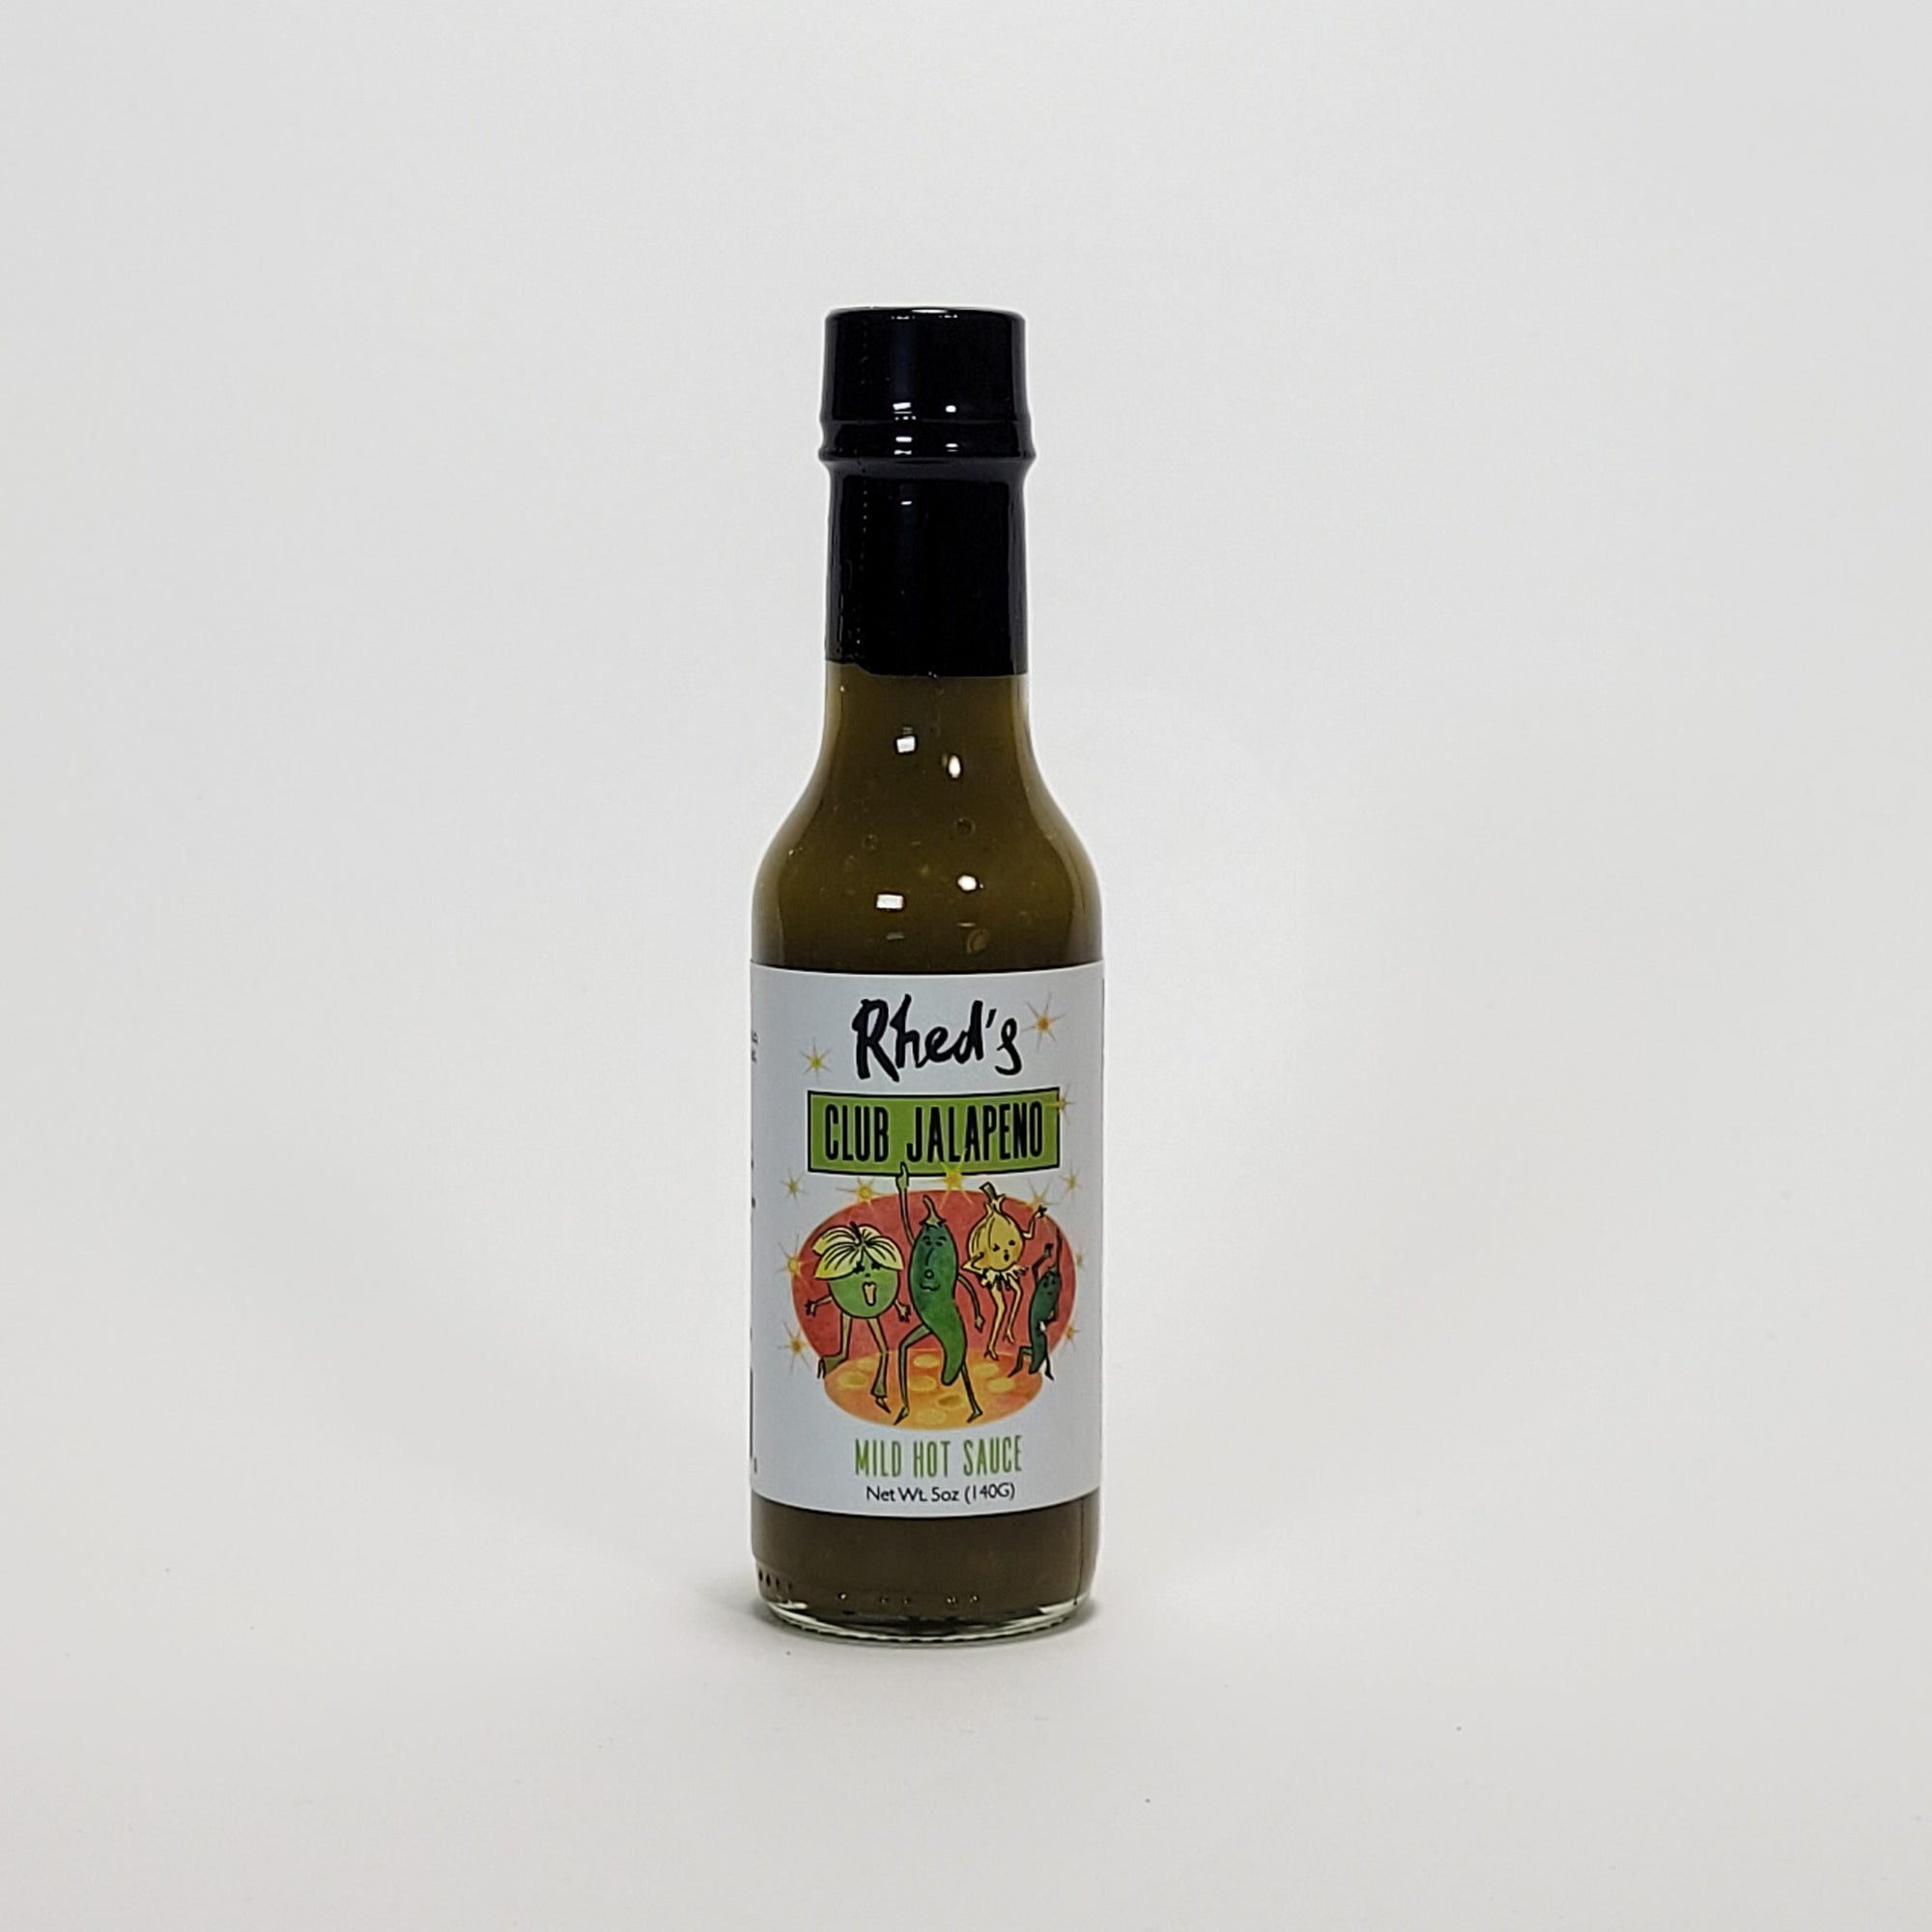 Rhed's Club Jalapeno hot sauce